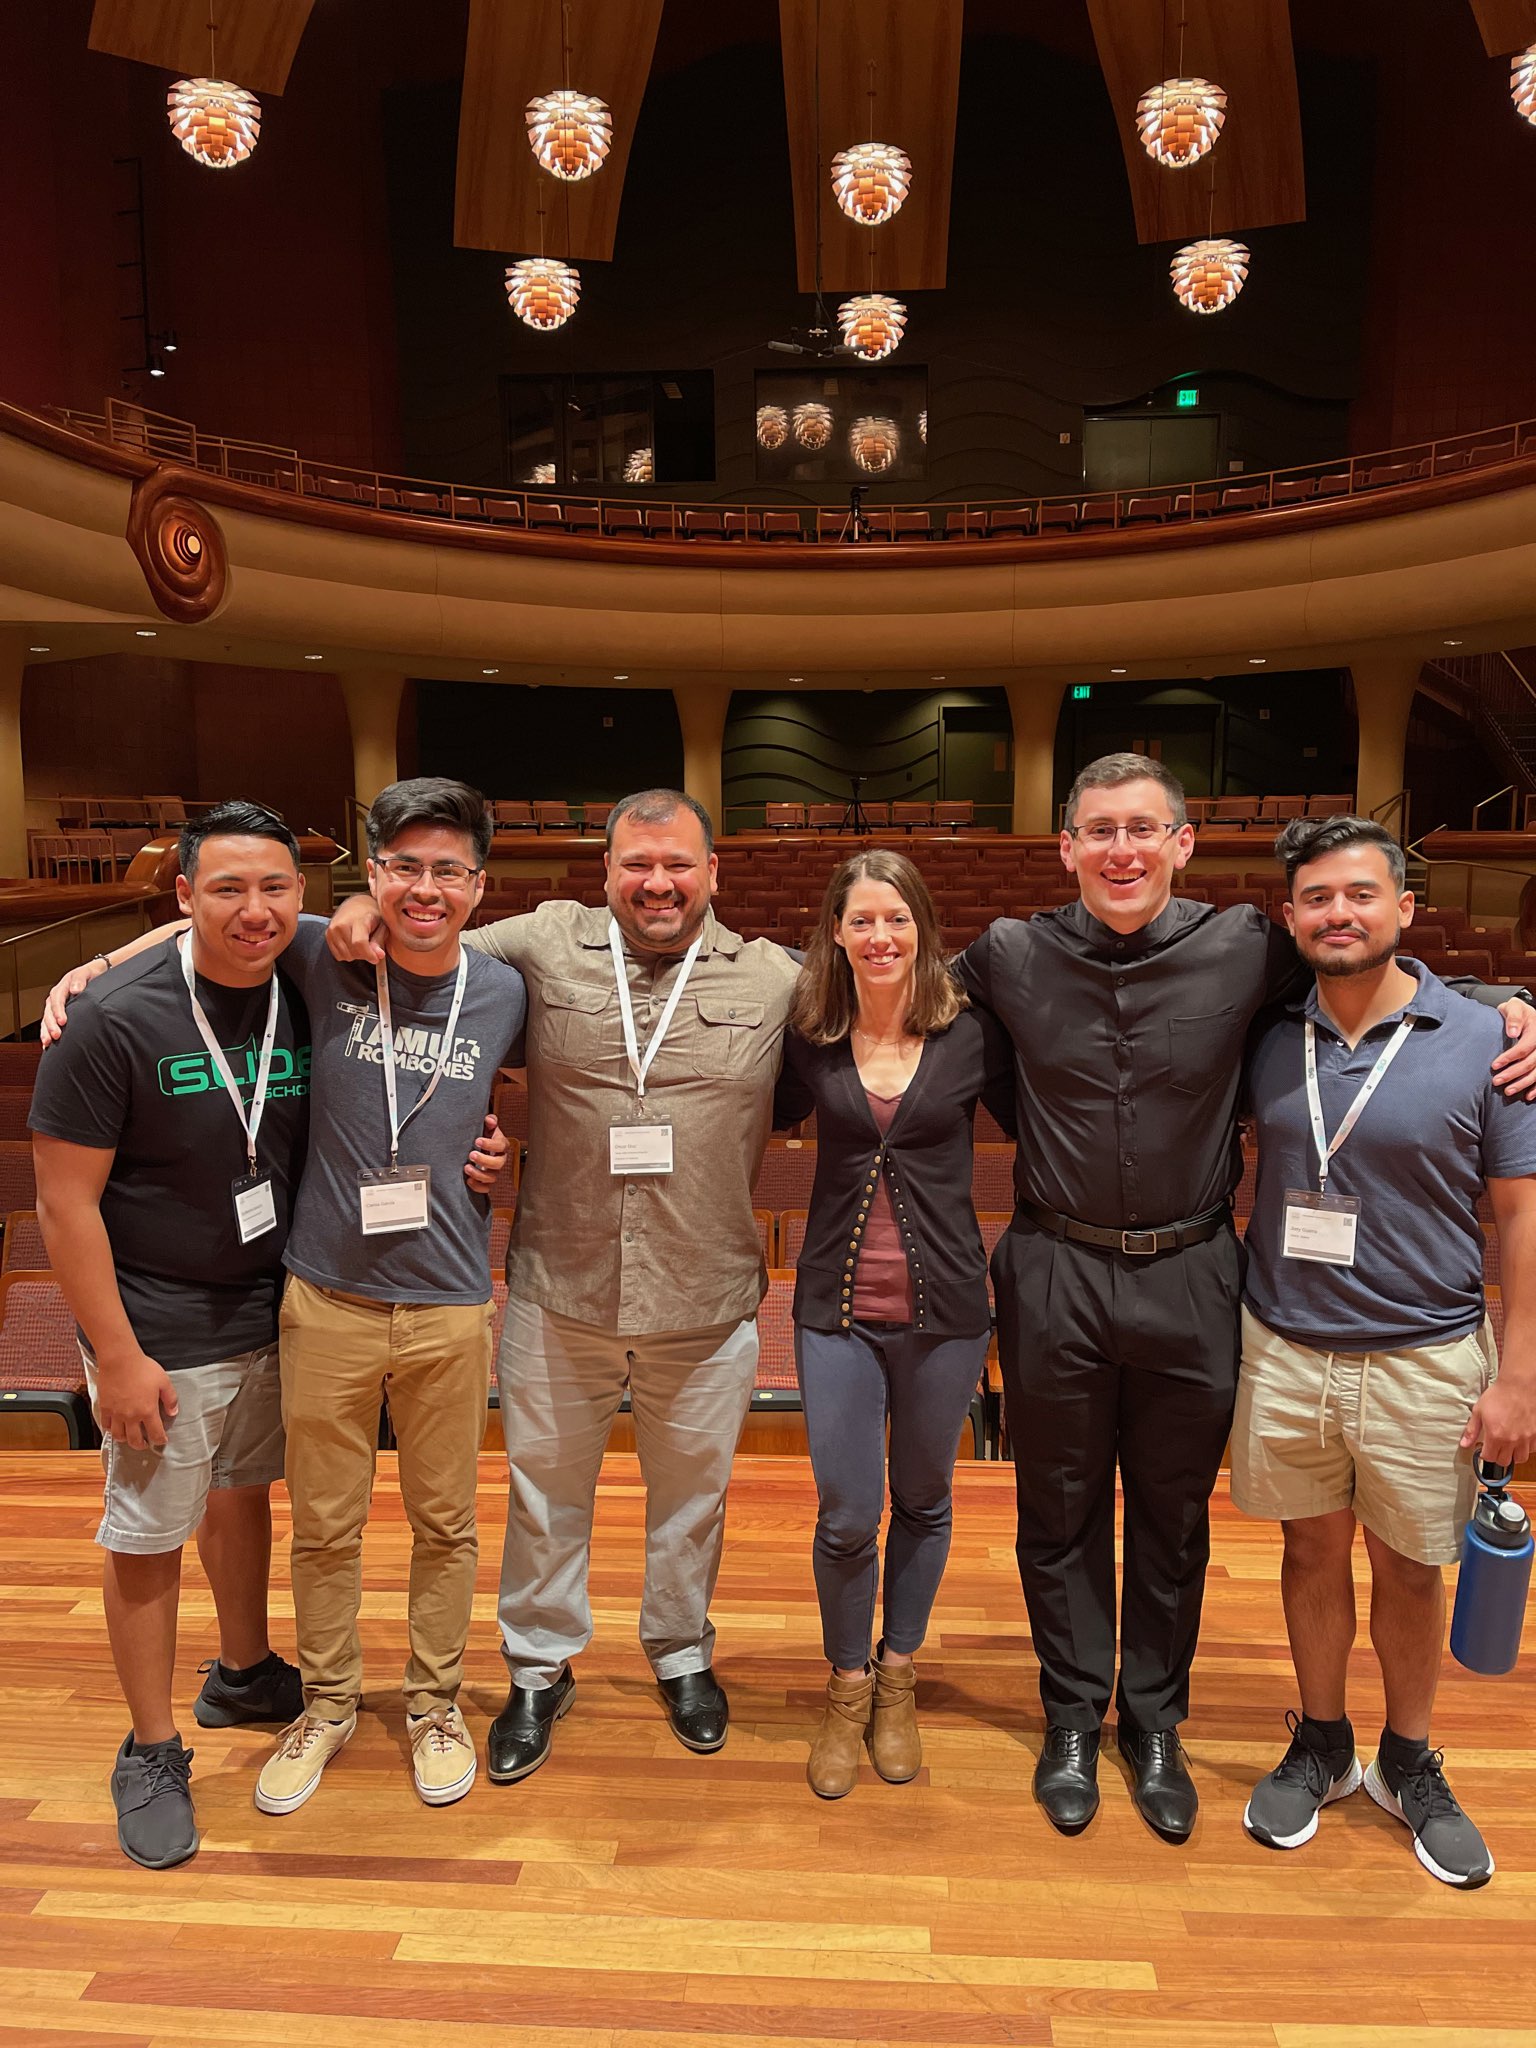 Texas A&M University-Kingsville’s School of Music trombone quartet stands on stage at the International Trombone Festival at Columbus State University in Georgia. From left to right: Guillermo Navarro, Carlos D. García, Dr. Óscar Diaz, Dr. Megan Boutin, Eden Garza and José Guerra.